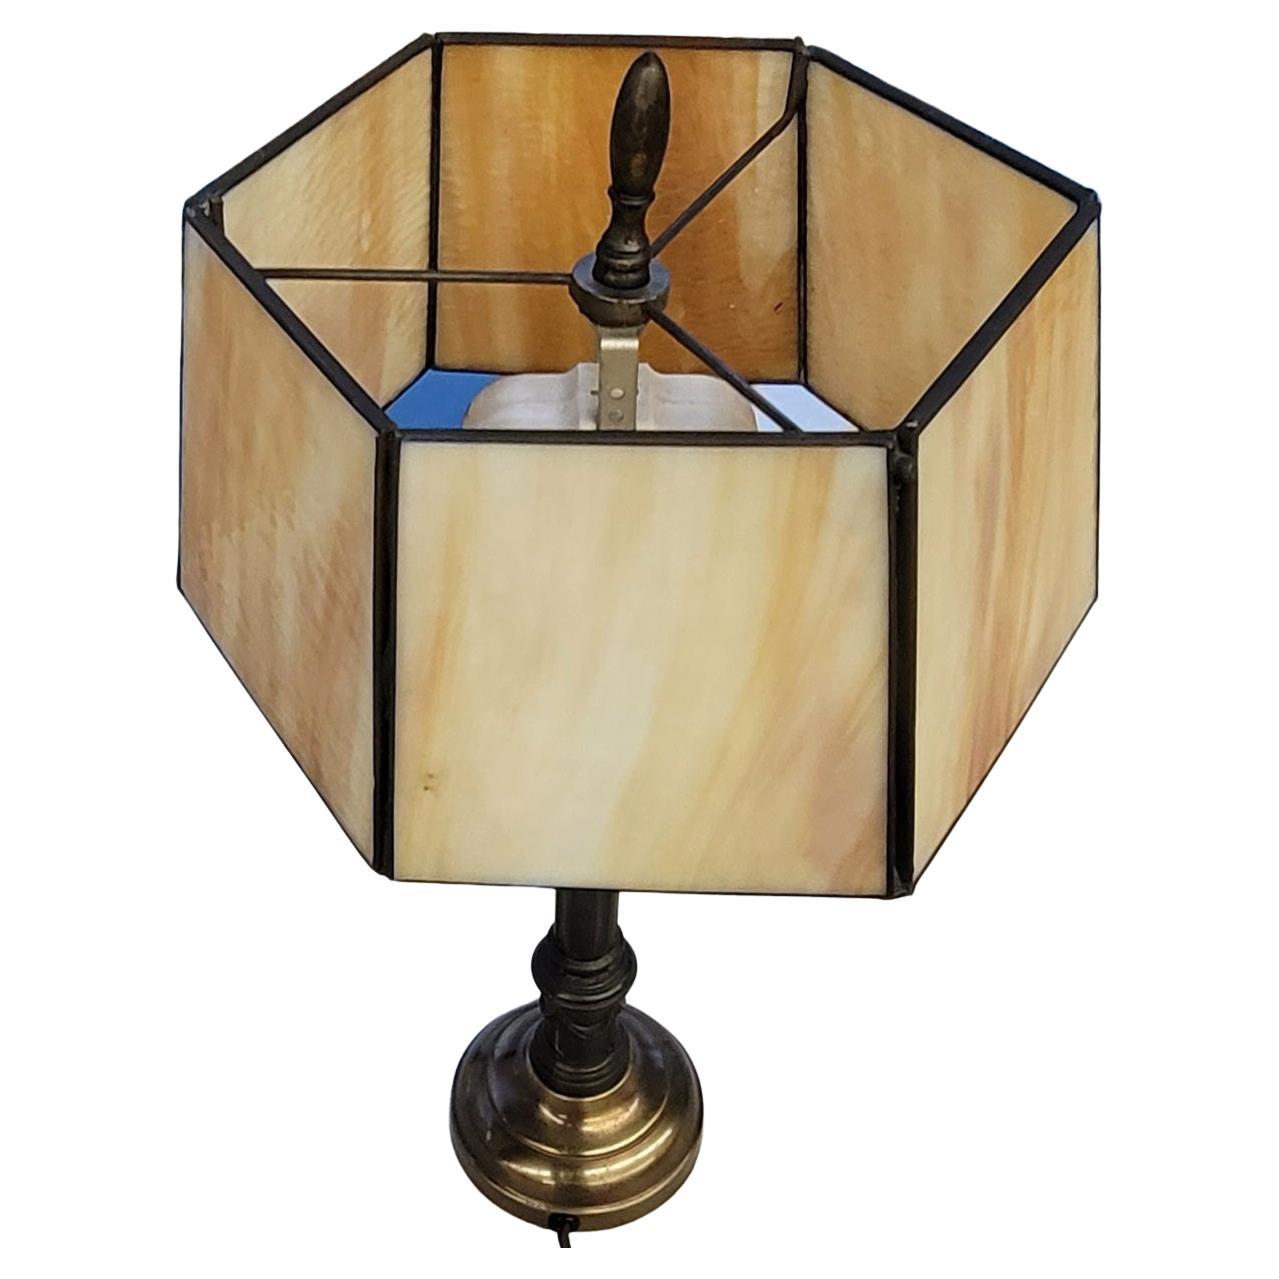 A mid-century hexagonal slag glass table lamp in good condition.
Measures 9.5